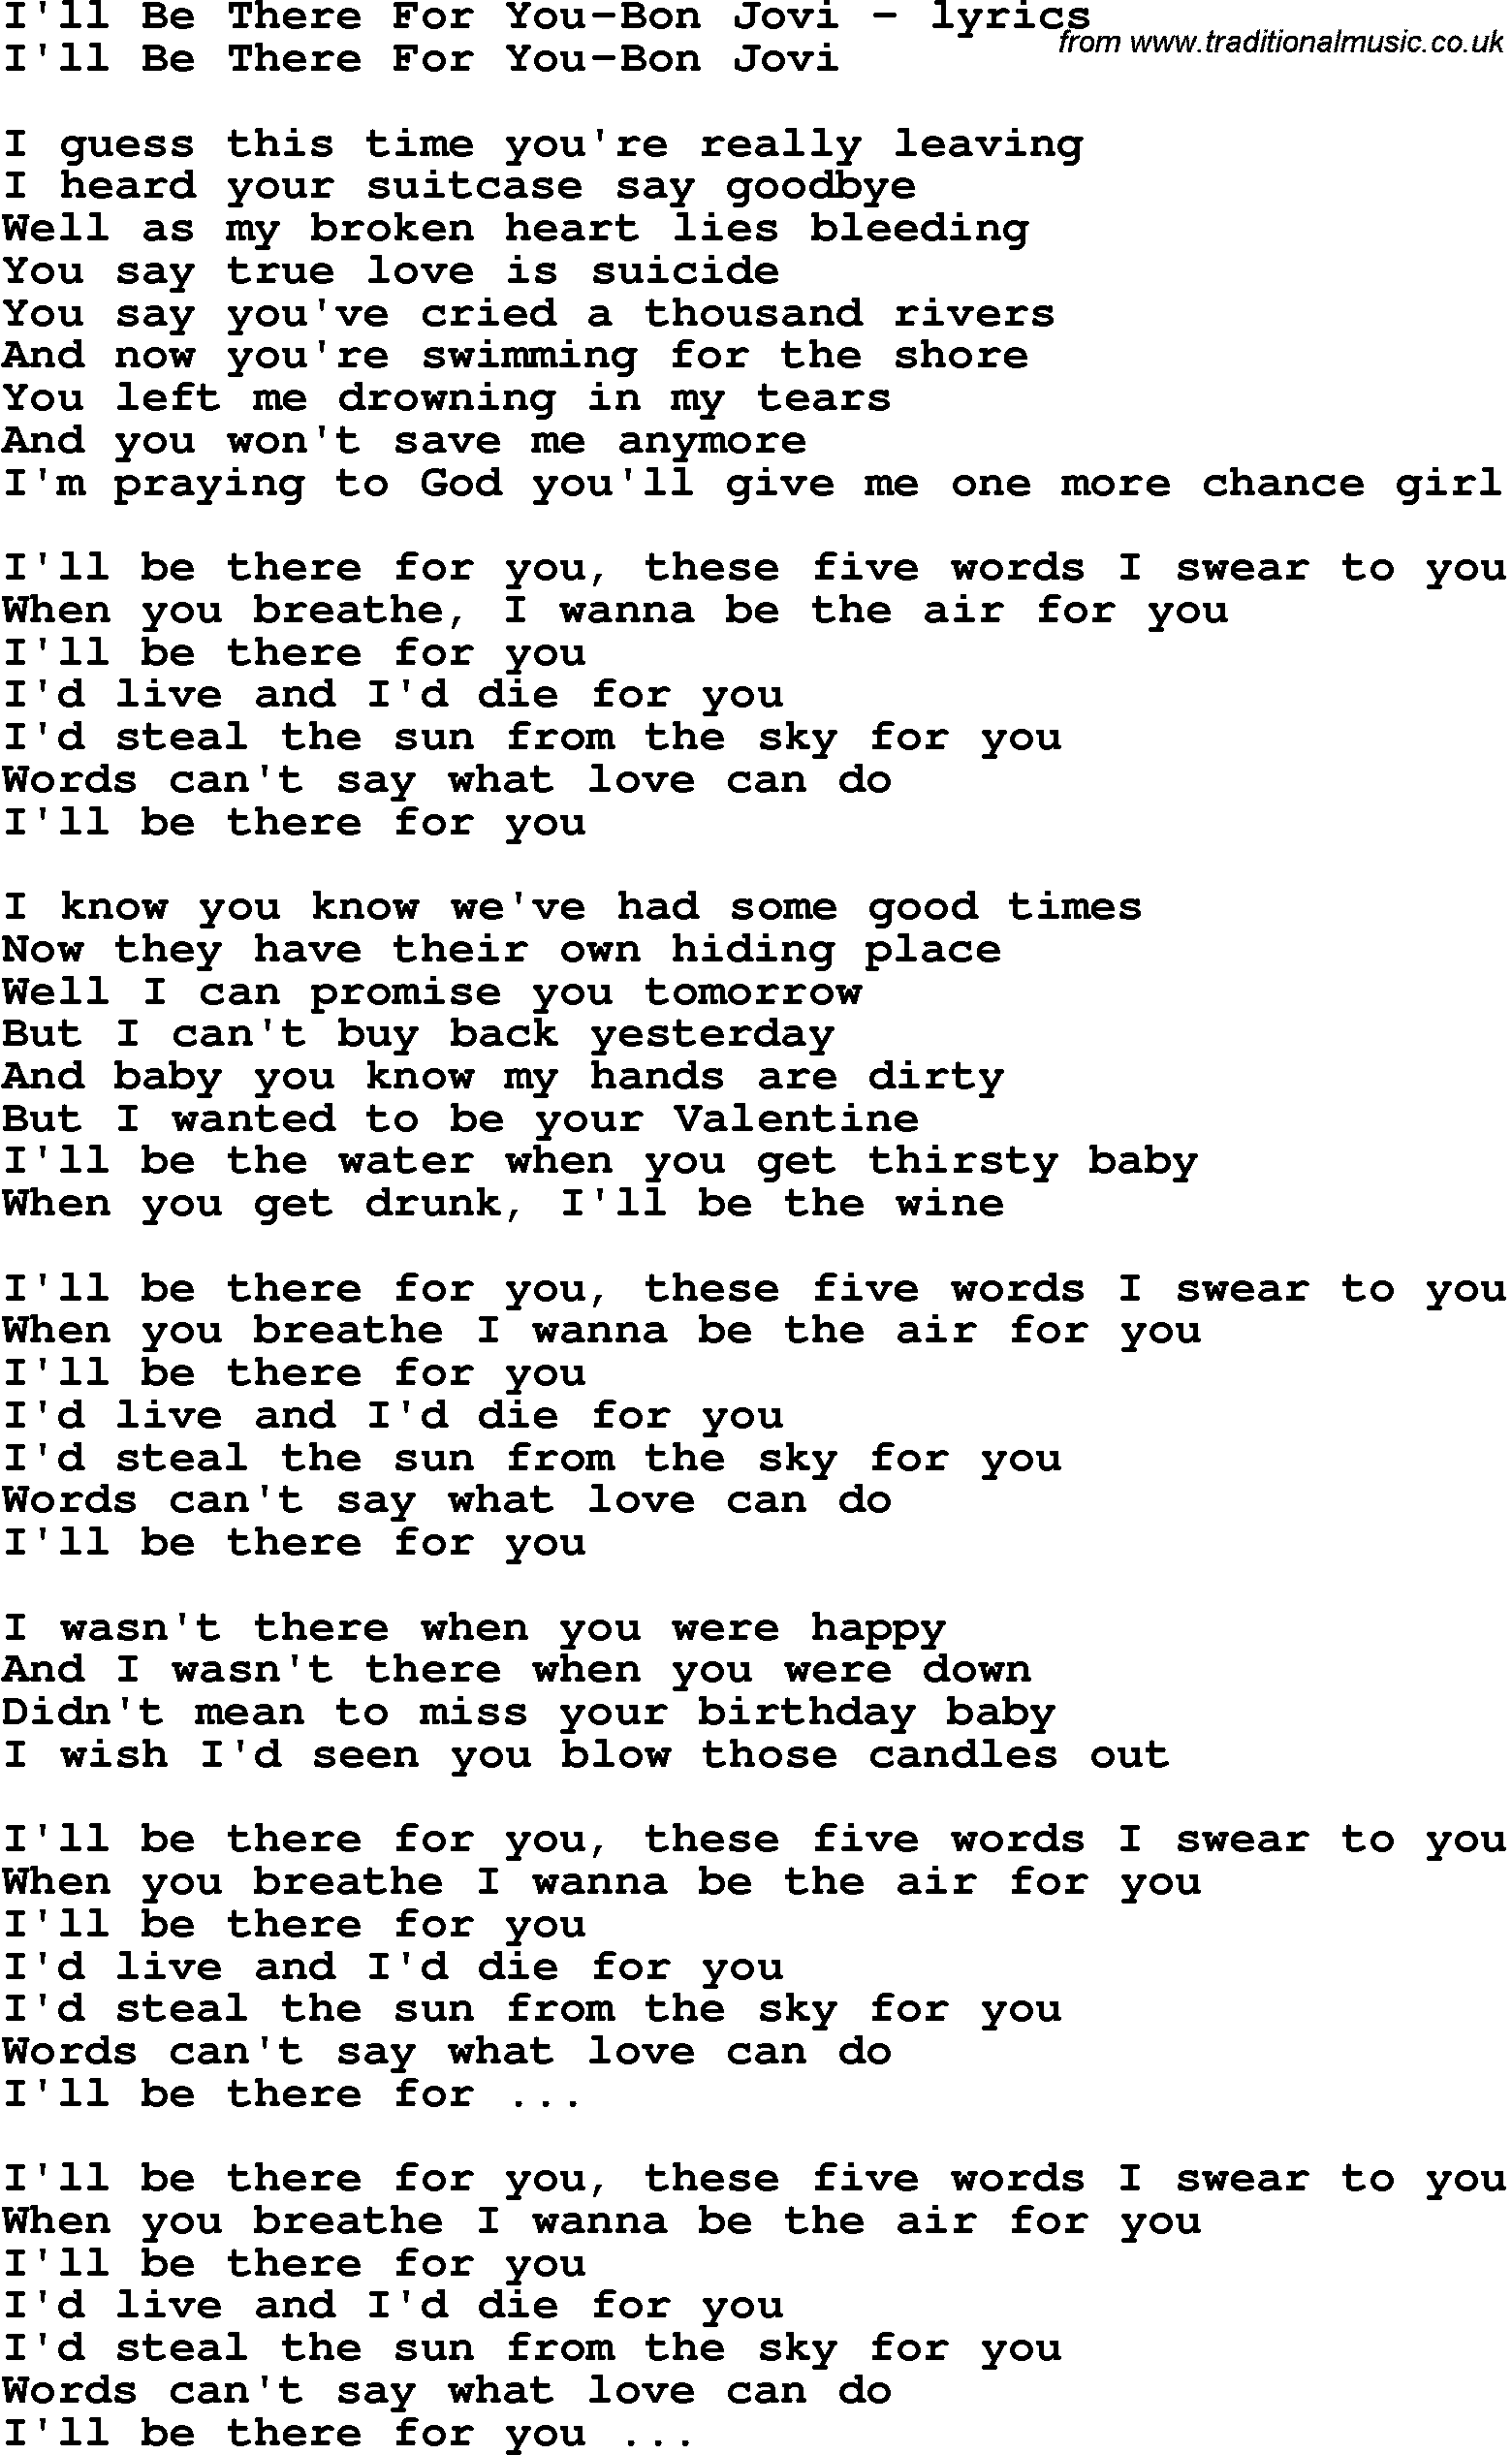 Love Song Lyrics for: I'll Be There For You-Bon Jovi